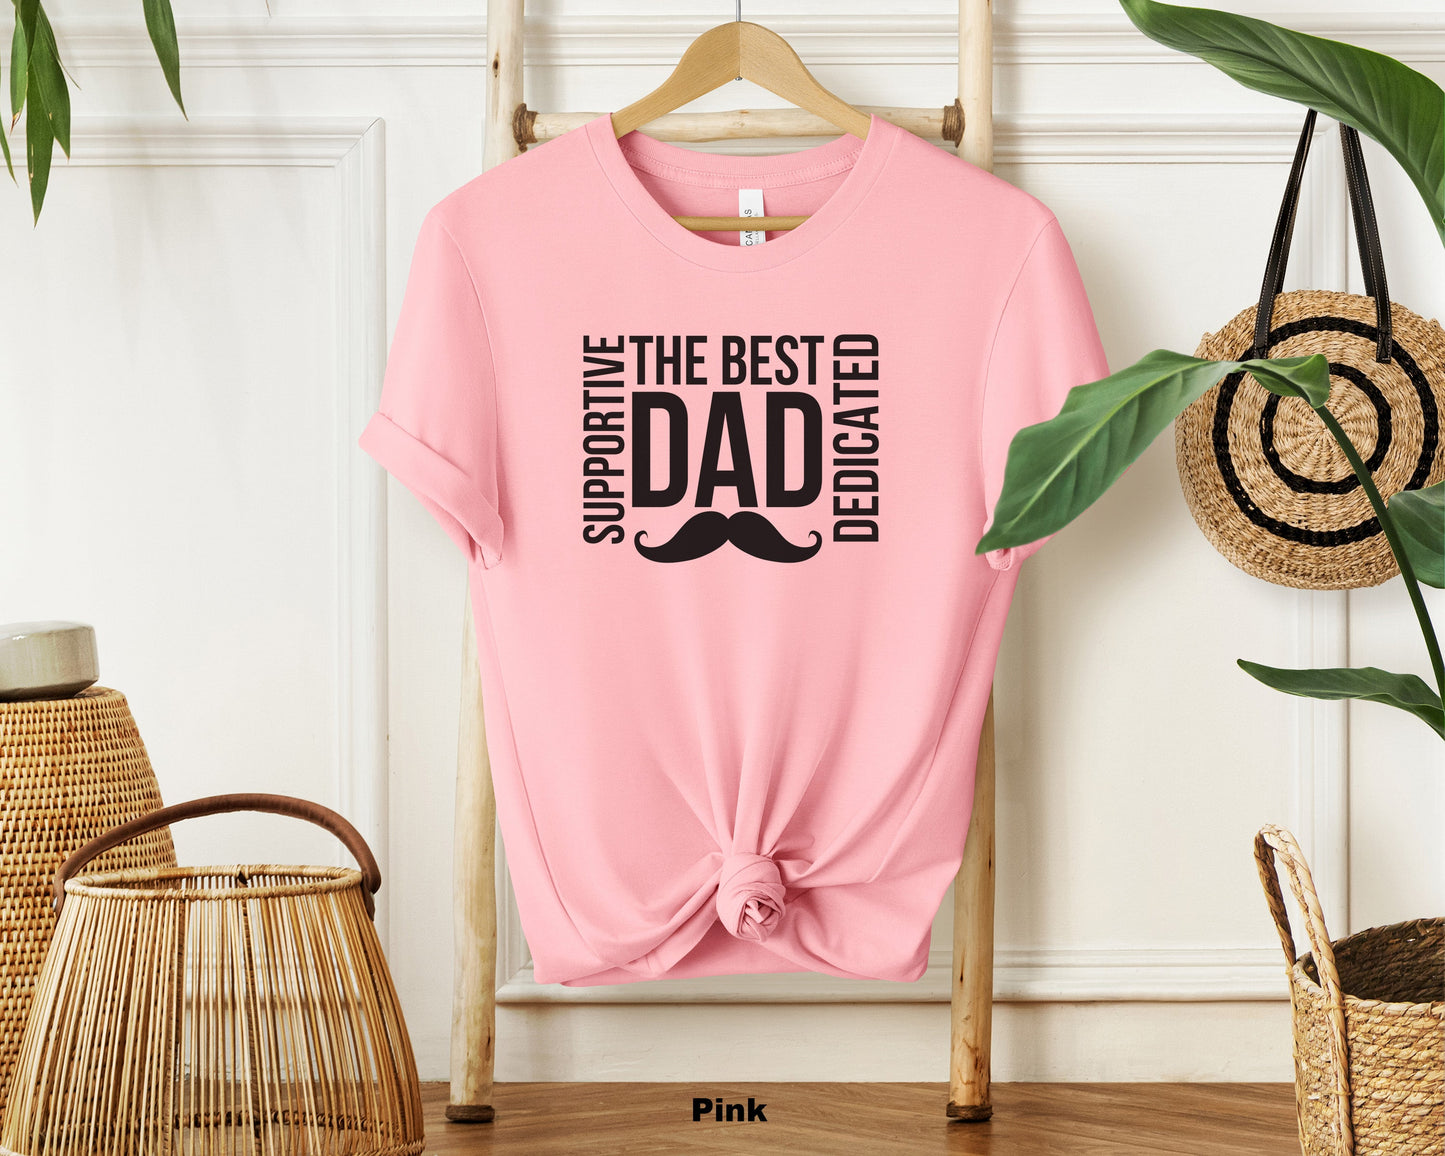 "Super Dad Classic Unisex Short Sleeve Crewneck T-Shirt in Soft Cotton Material with Quality Print"